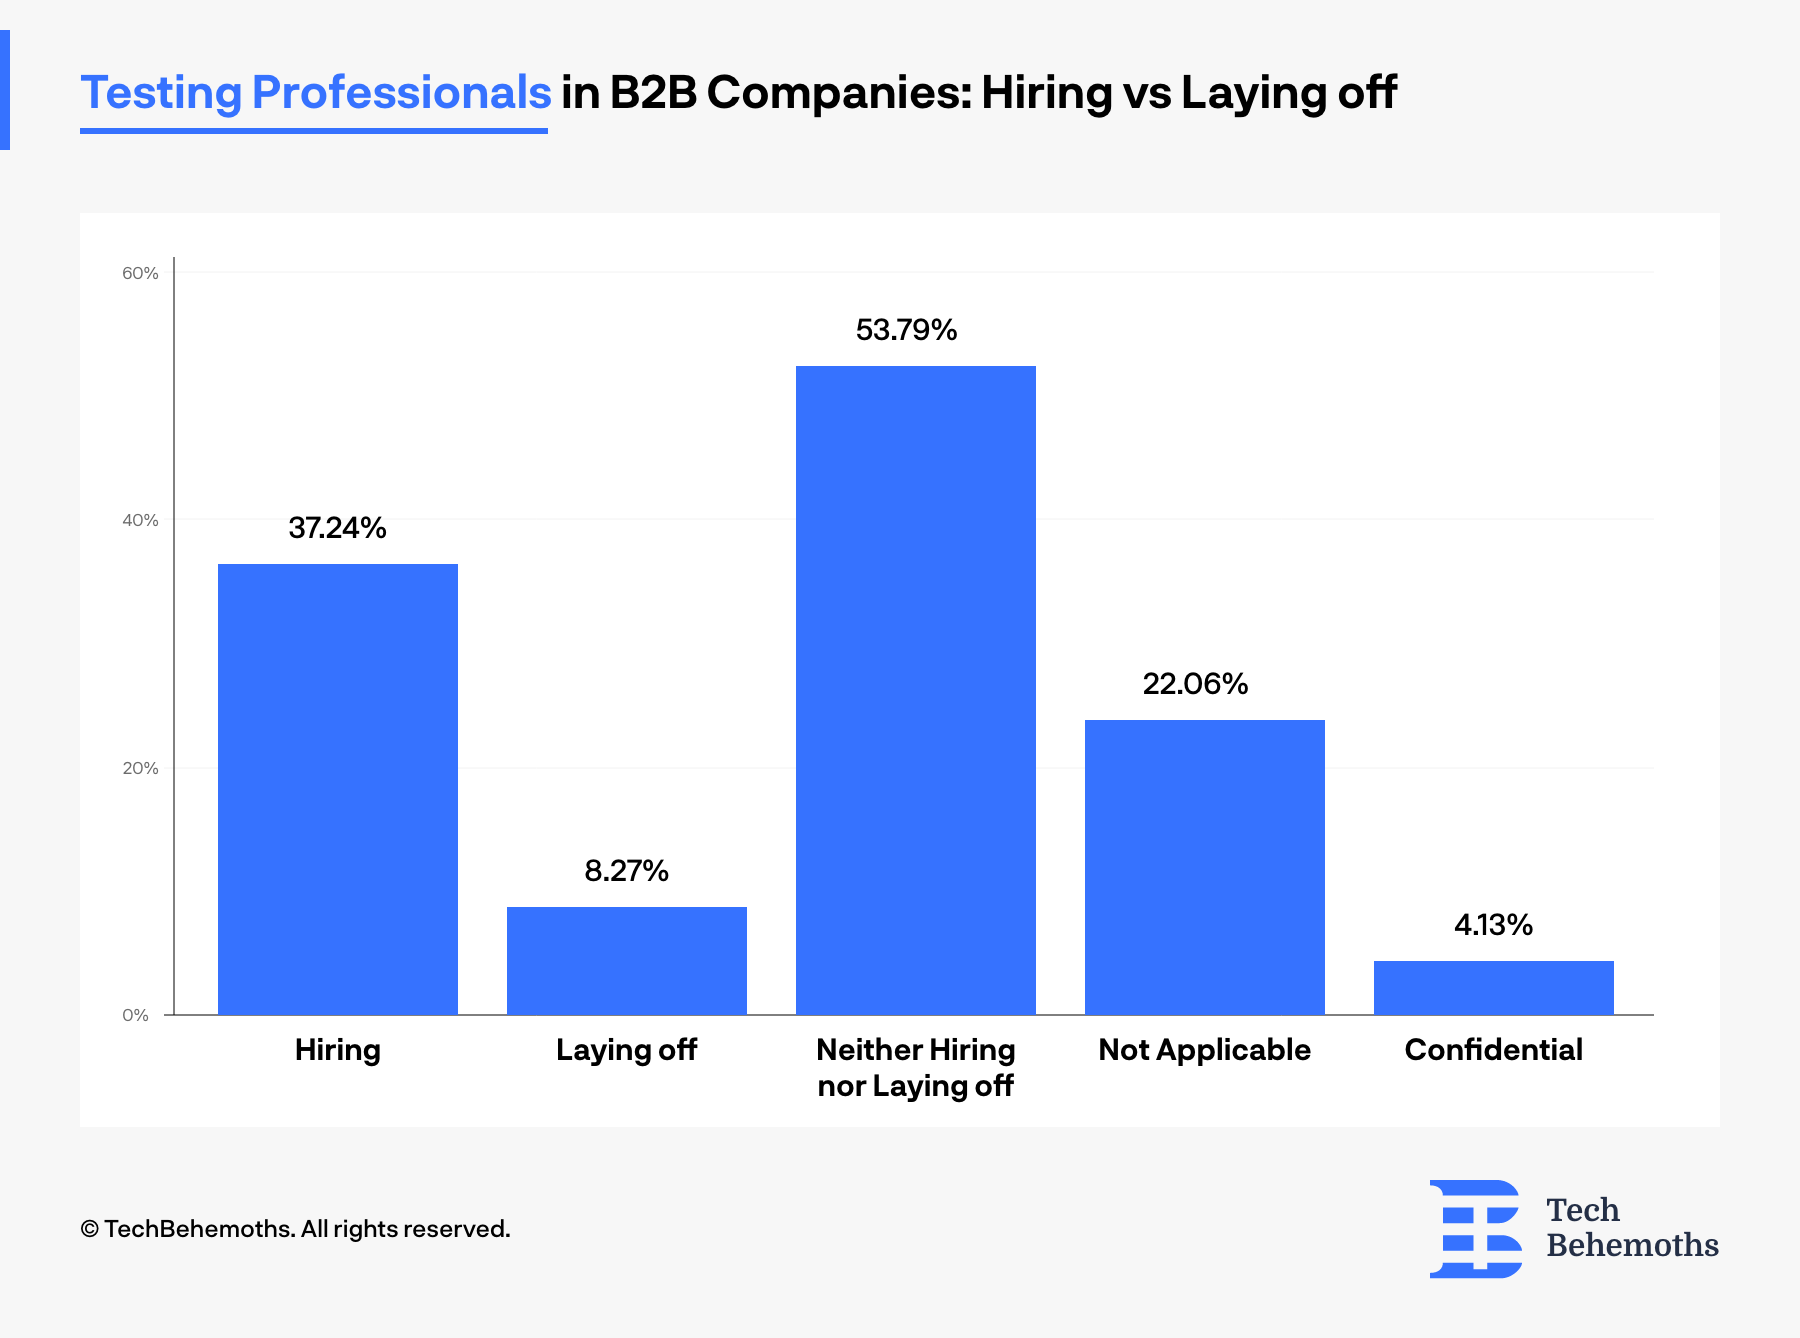 8.27% of B2B companies are laying off testers in 2023 according to survey results